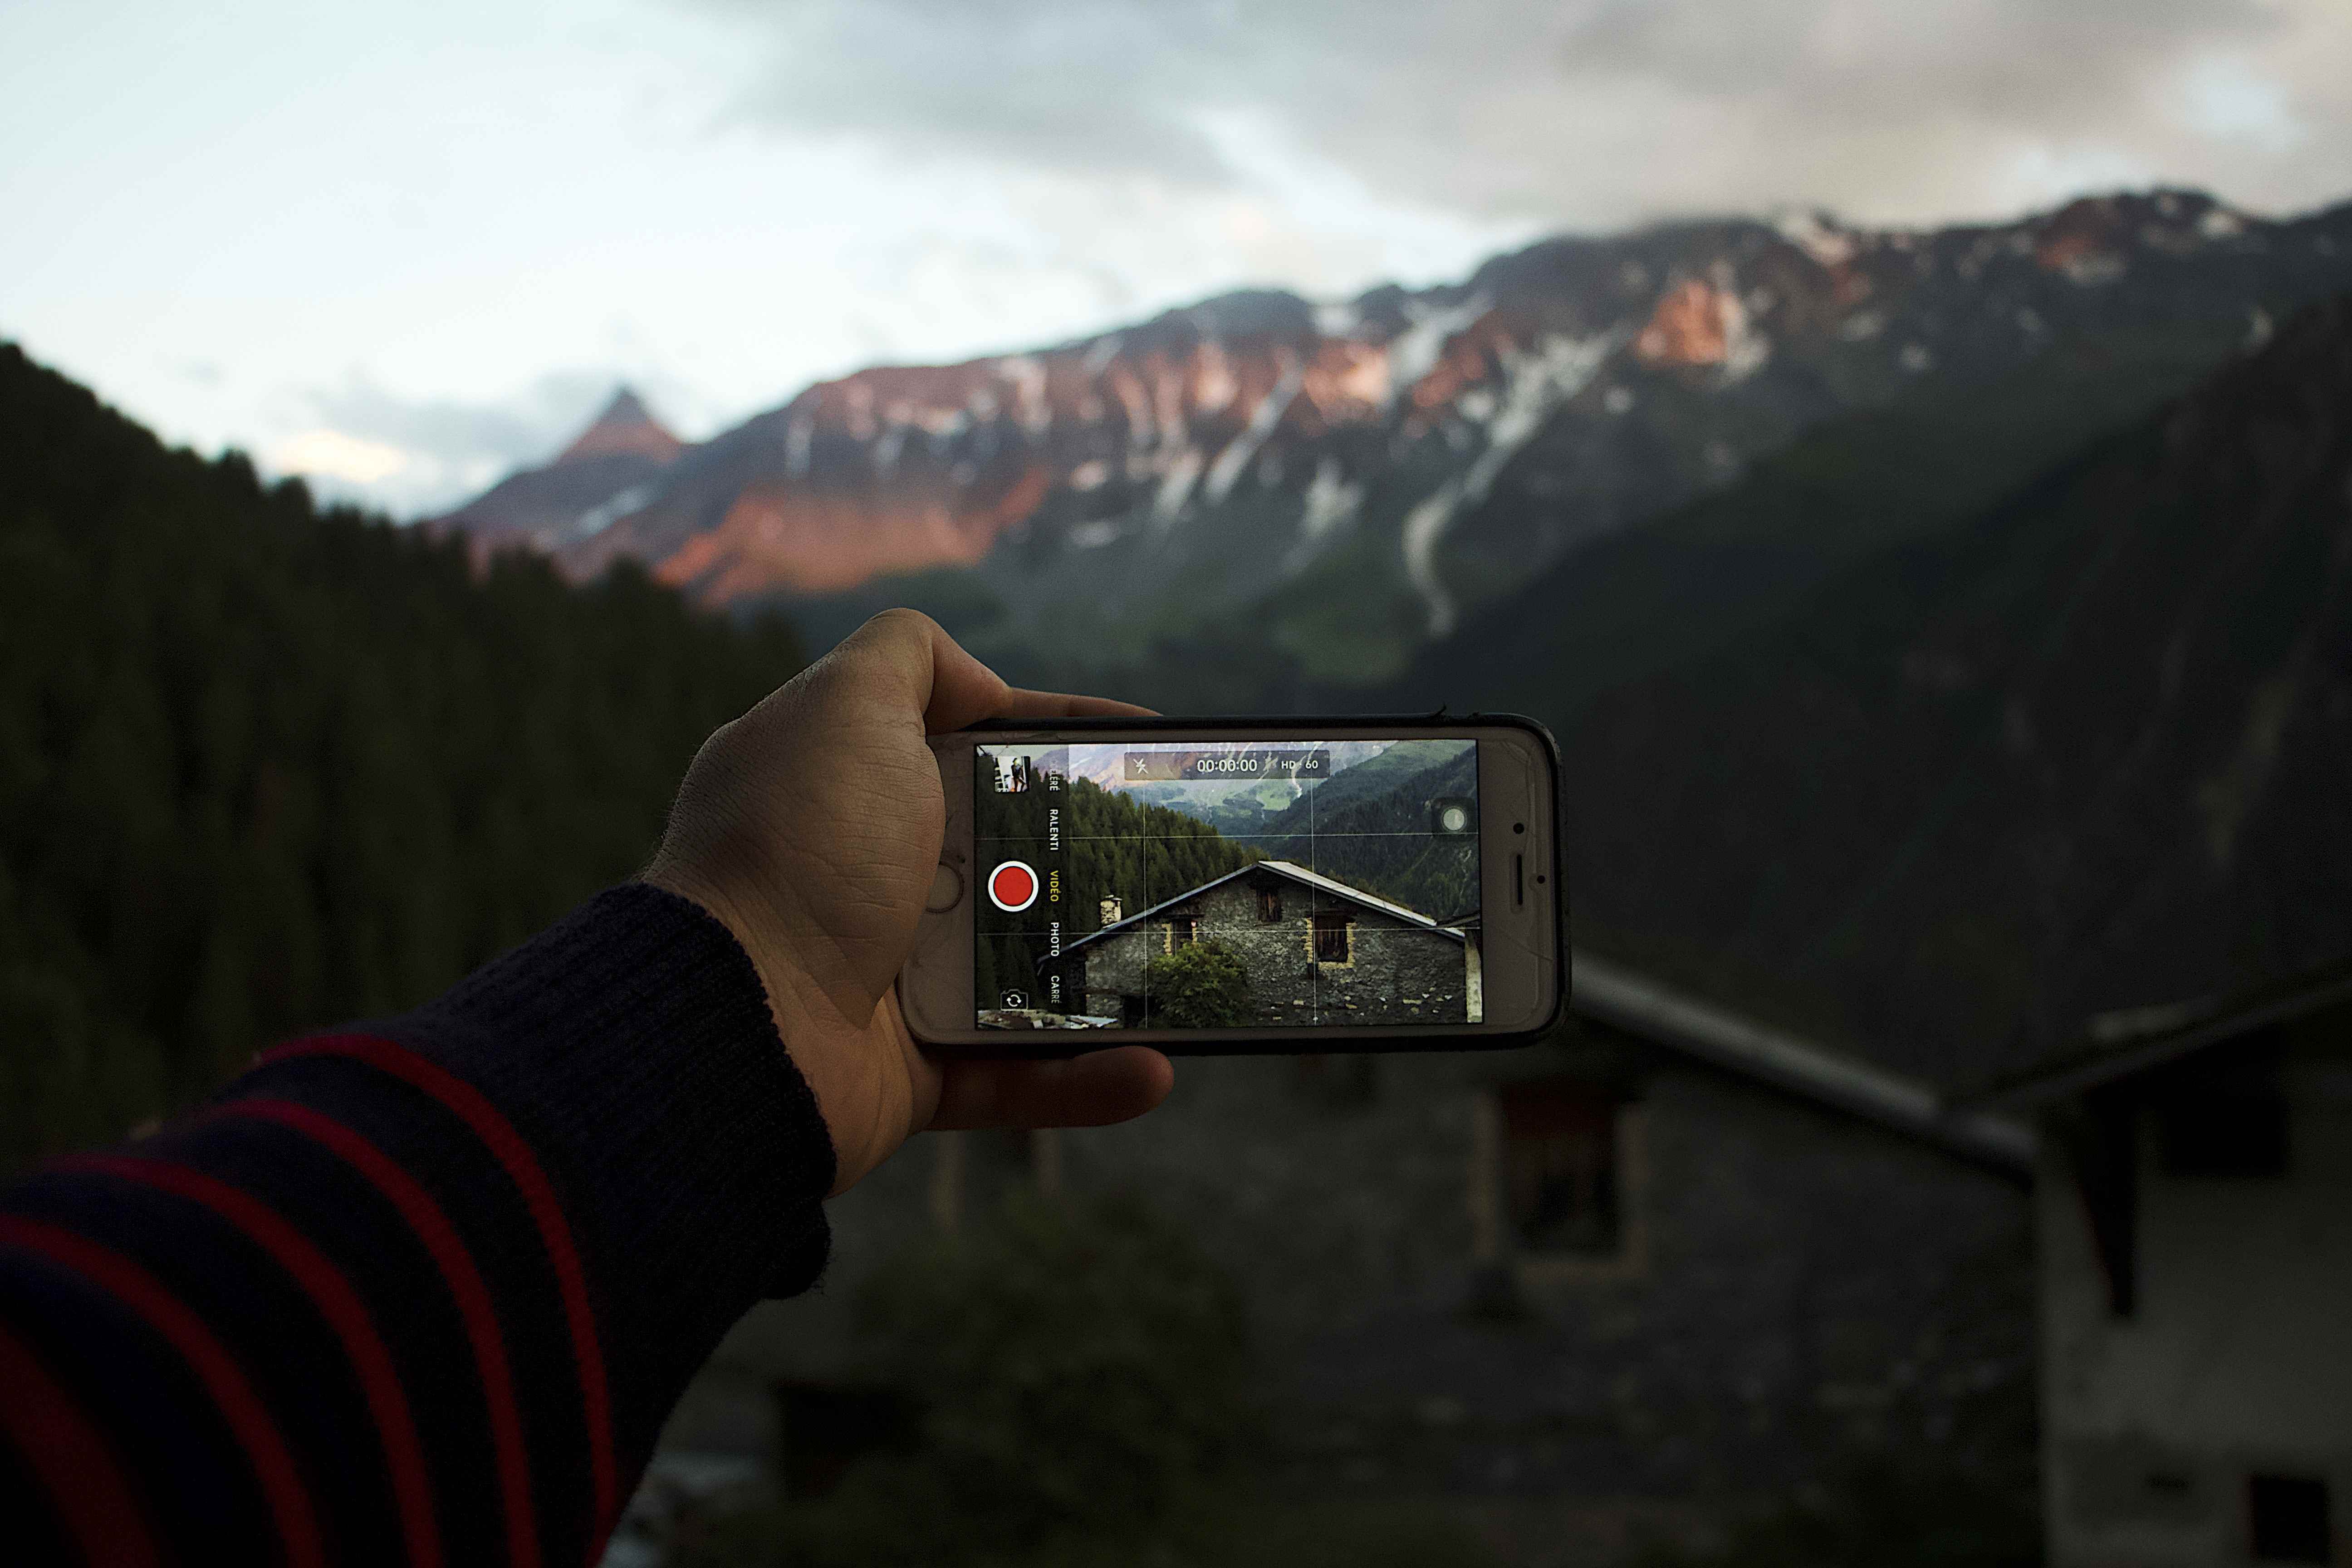 How to Shoot High Quality Video on Your iPhone